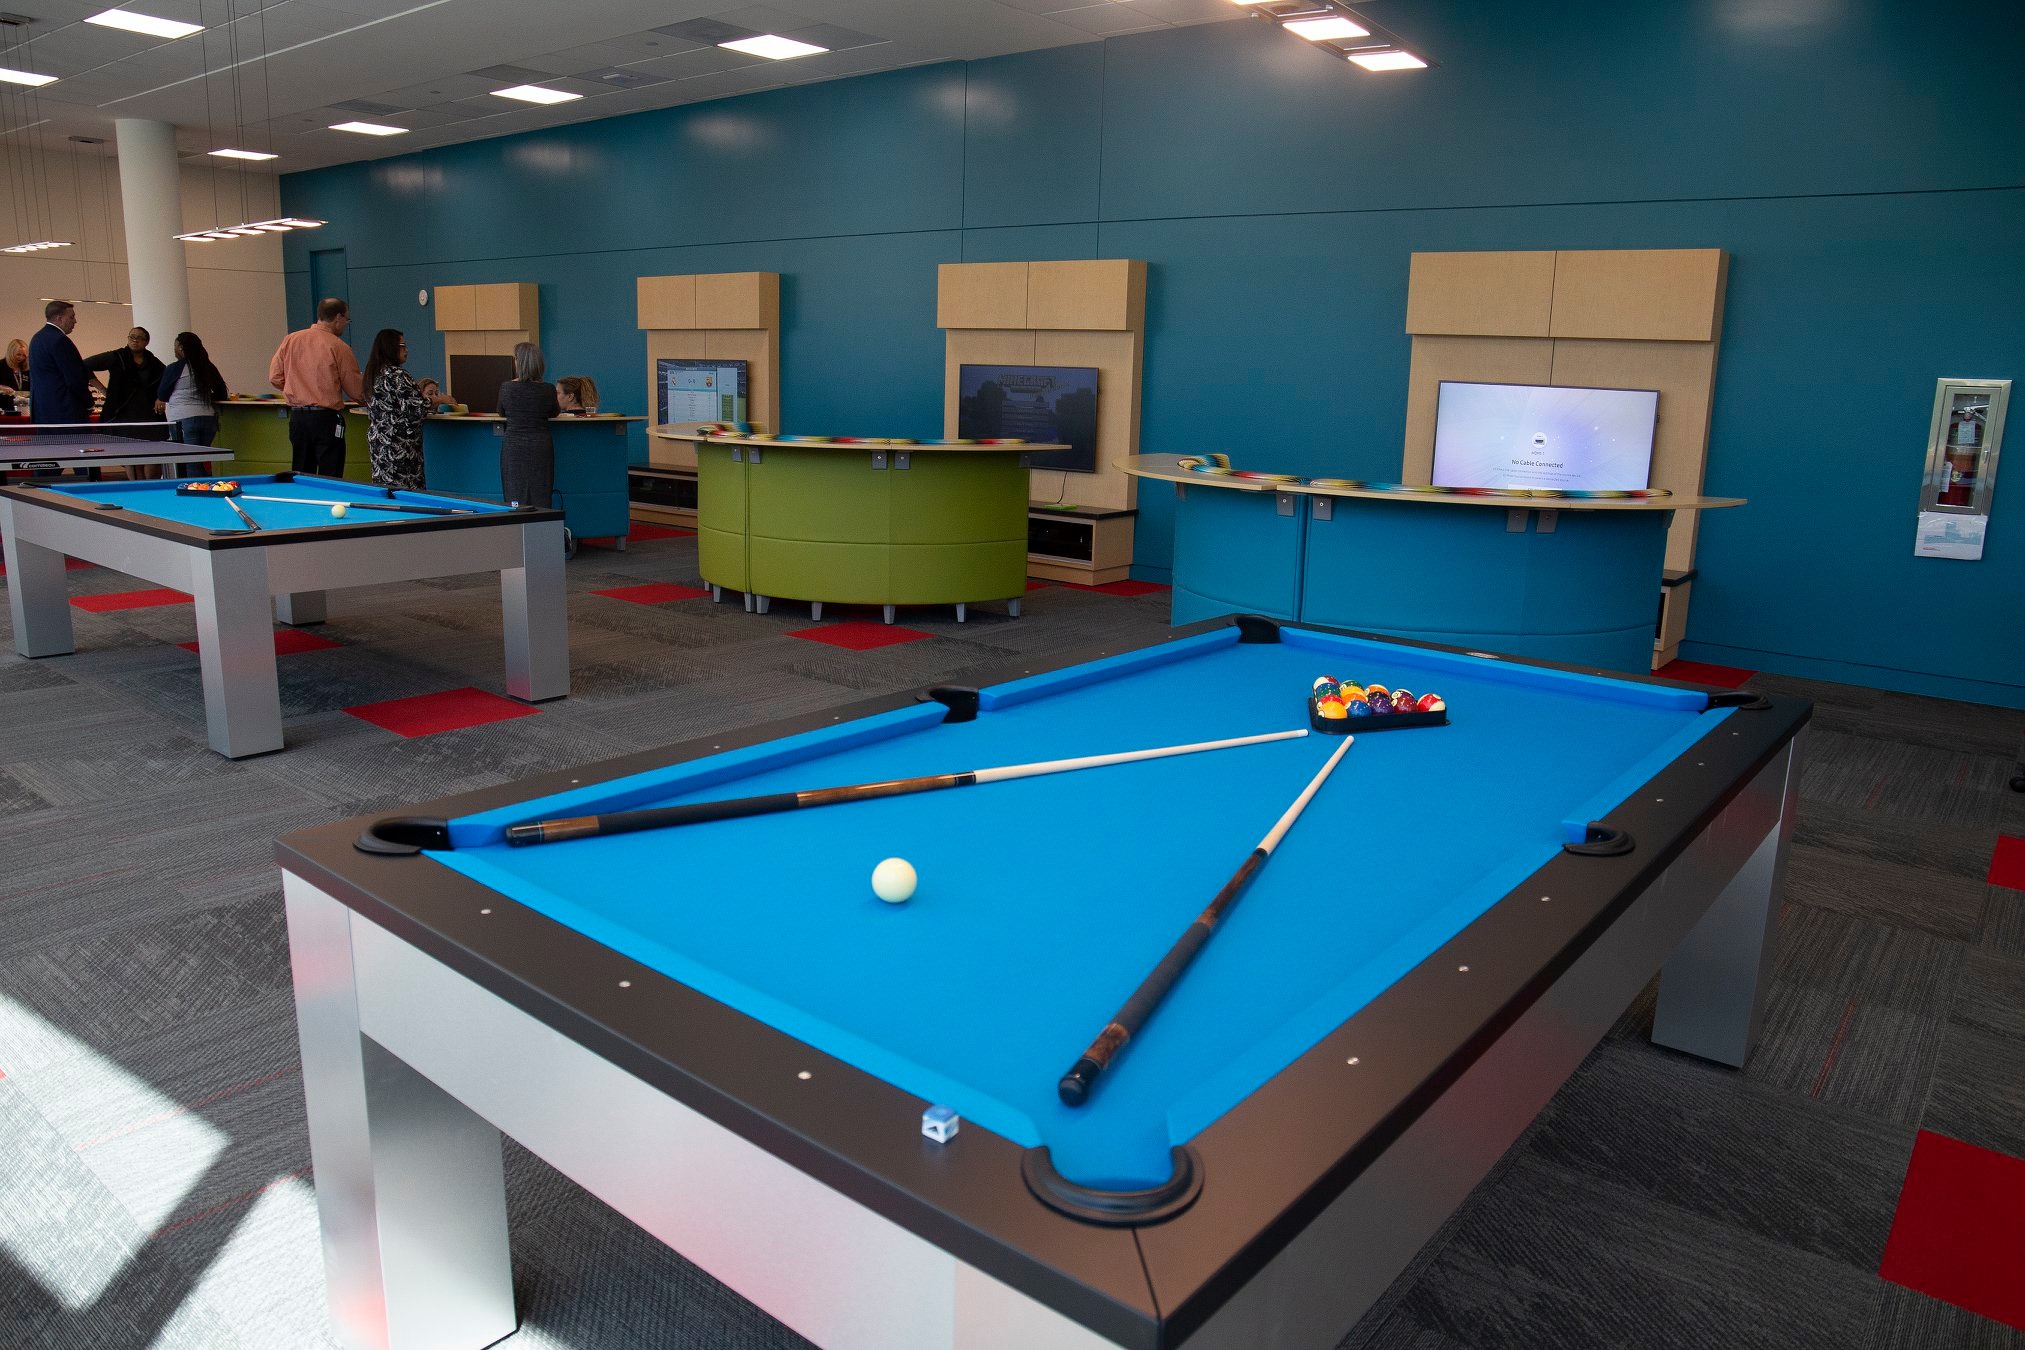 The Lion's Den pool tables, TVs and lounge